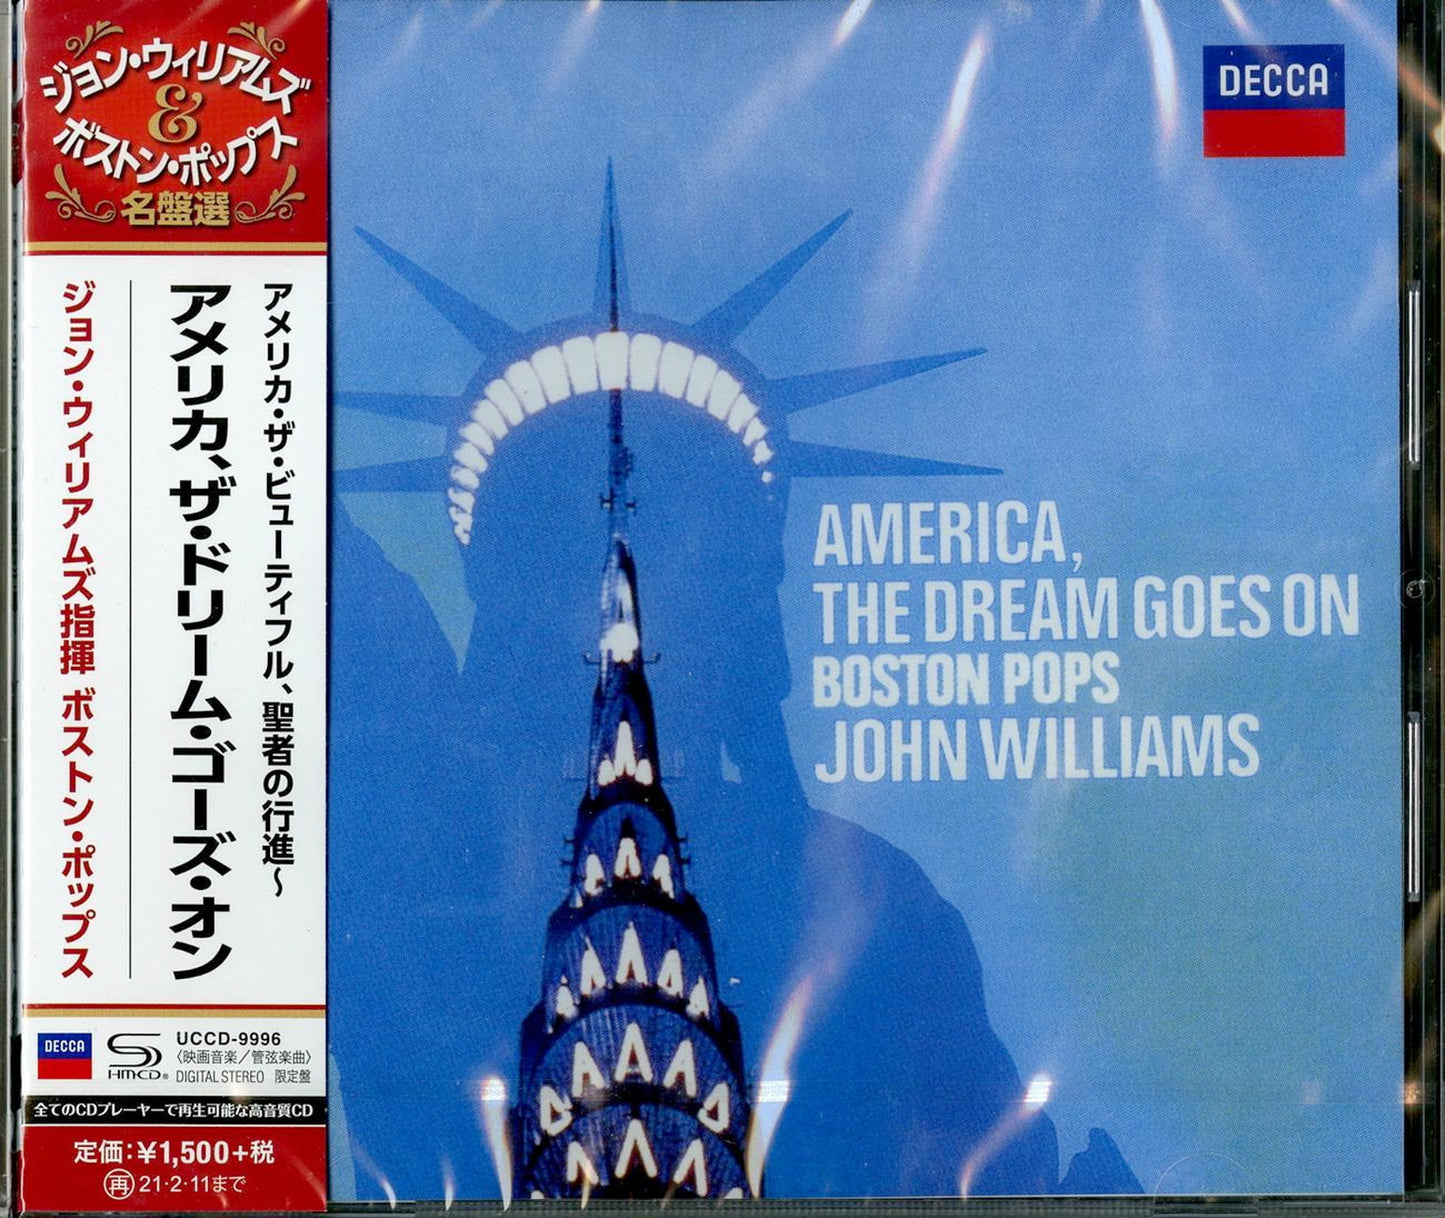 John Williams & The Boston Pops Orchestra - America: The Dream Goes On - Japan  SHM-CD Limited Edition